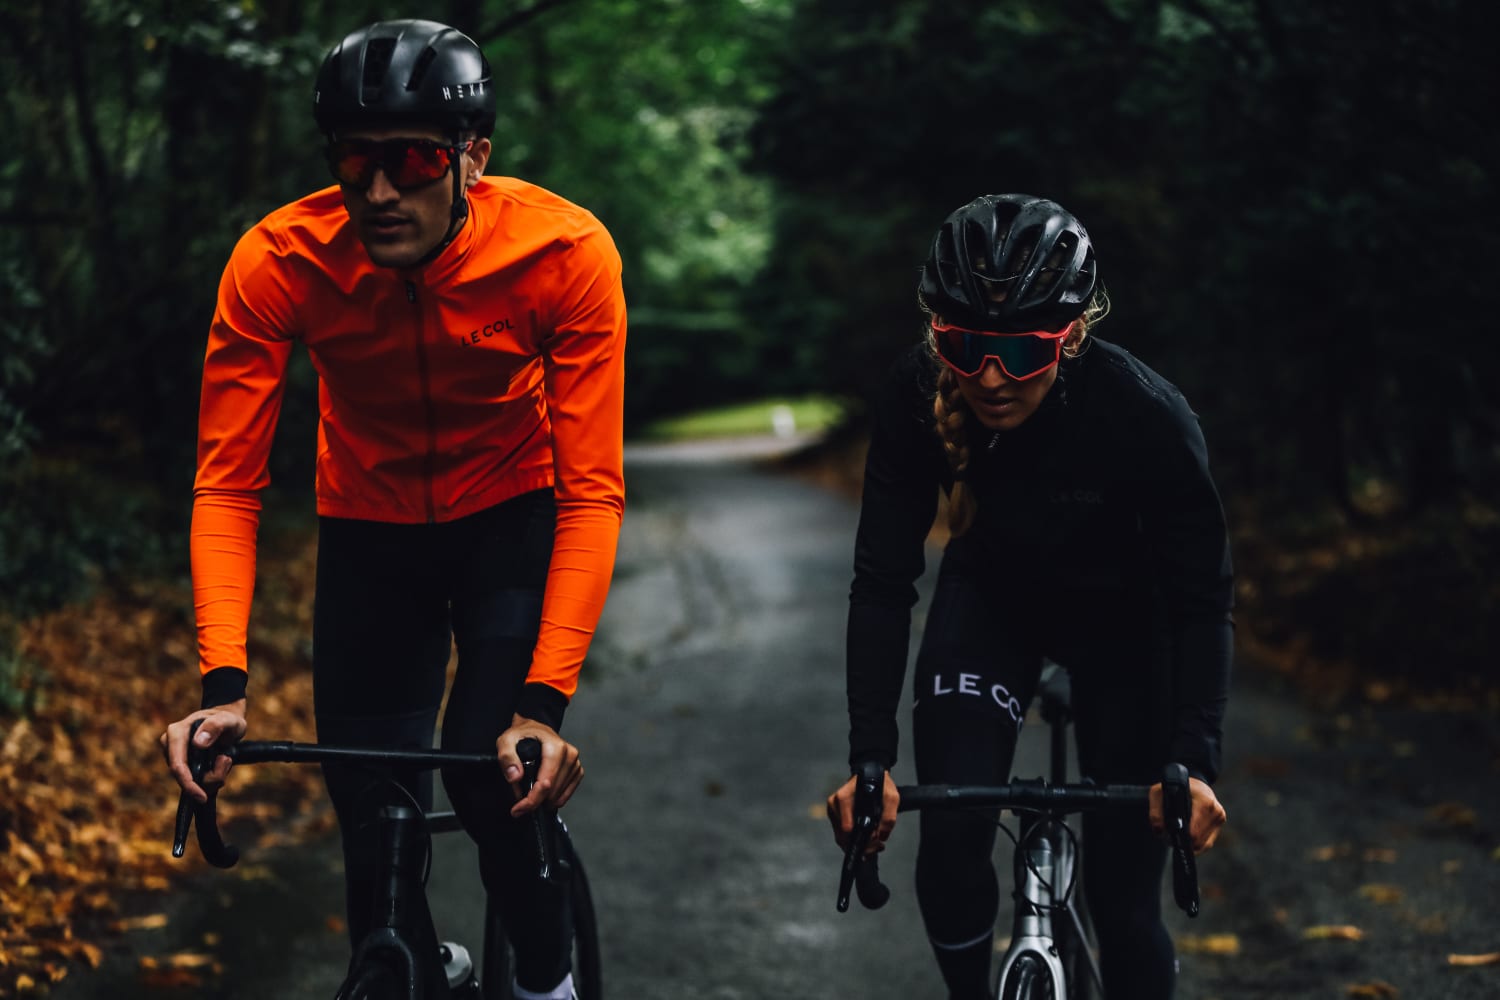 Le Col Cycling Clothing